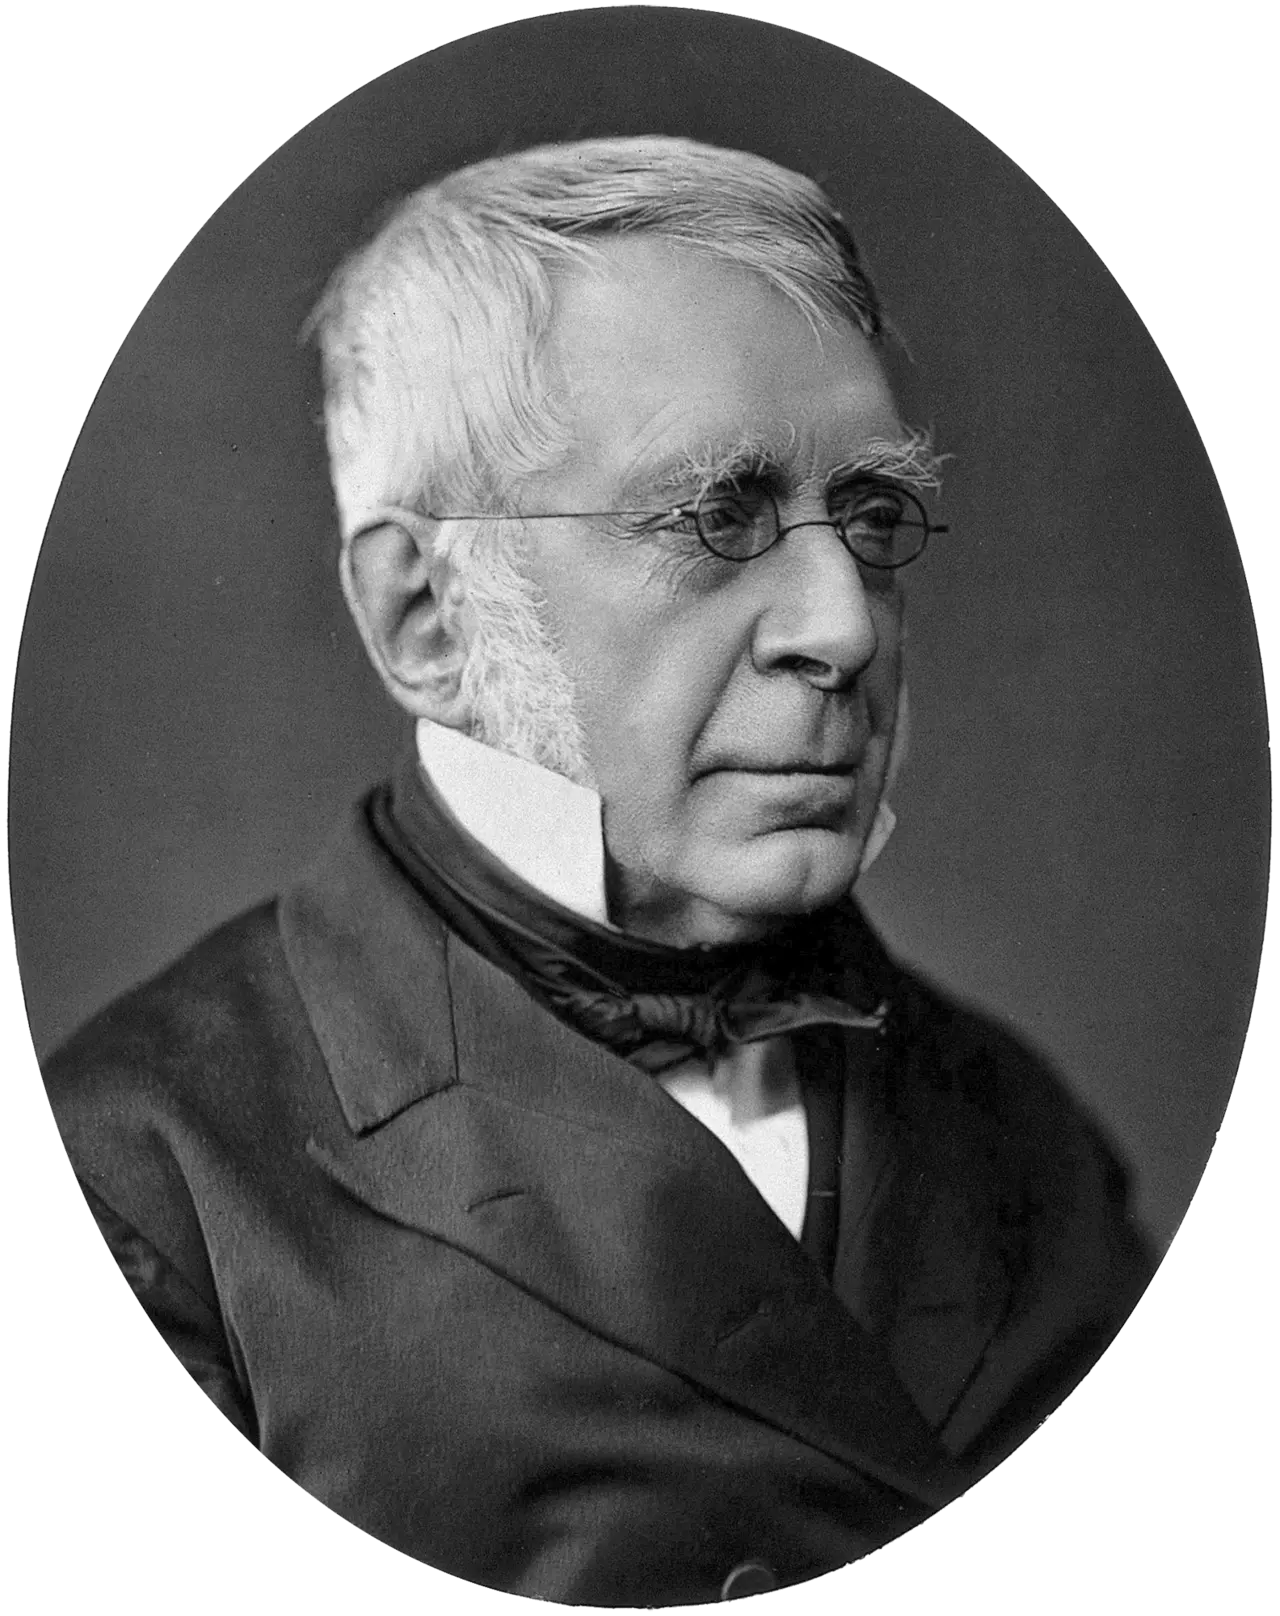 Black and white portrait of Astronomer Royal, George Biddell